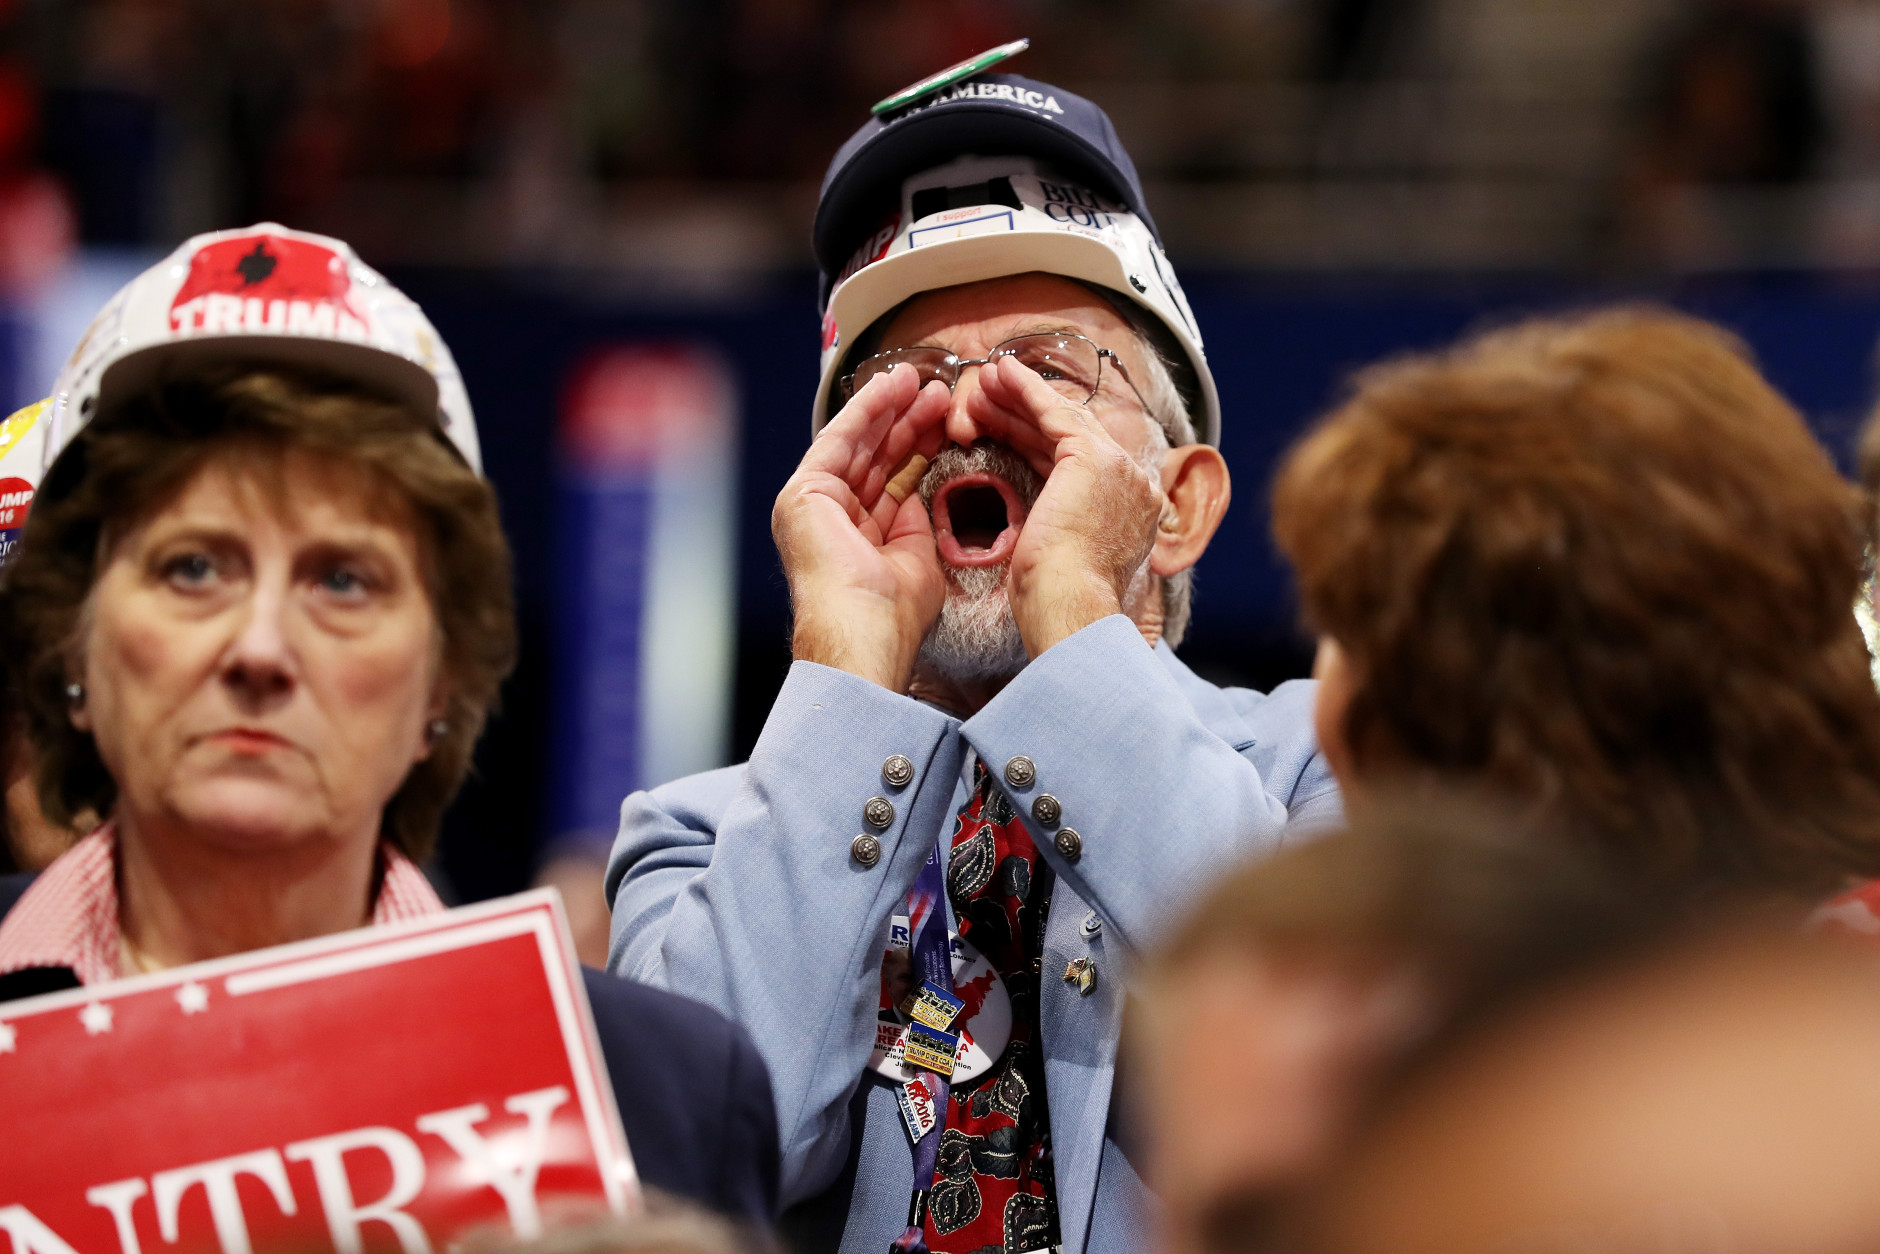 CLEVELAND, OH - JULY 20: A delegate shouts during the third day of the Republican National Convention on July 20, 2016 at the Quicken Loans Arena in Cleveland, Ohio. Republican presidential candidate Donald Trump received the number of votes needed to secure the party's nomination. An estimated 50,000 people are expected in Cleveland, including hundreds of protesters and members of the media. The four-day Republican National Convention kicked off on July 18. (Photo by John Moore/Getty Images)